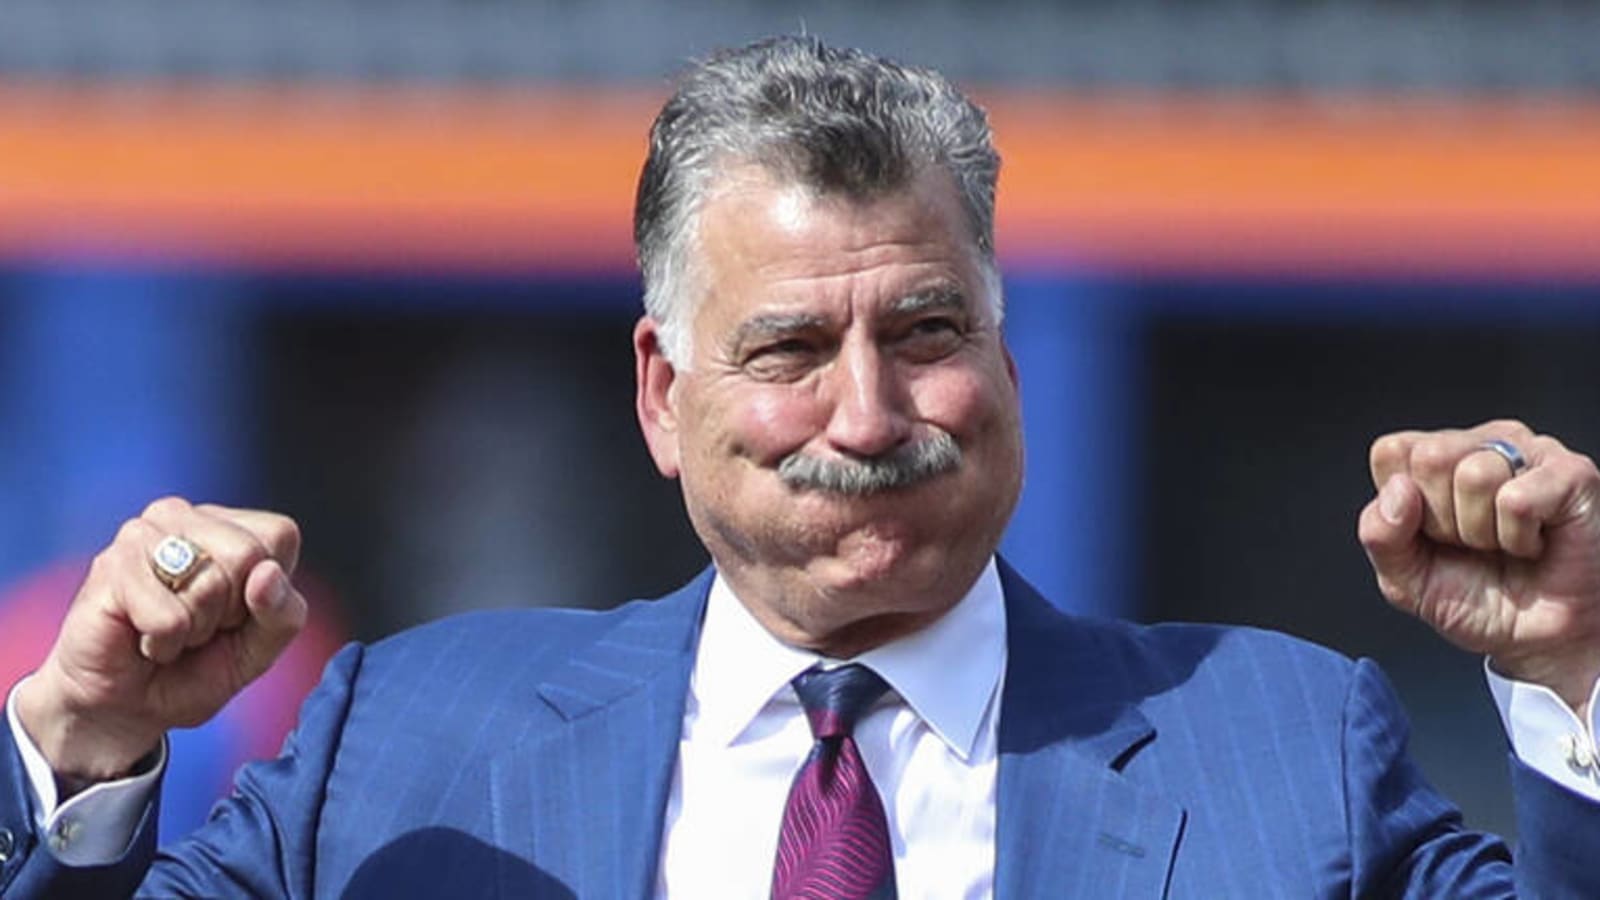 New York Mets to retire No. 17 jersey of Keith Hernandez on July 9